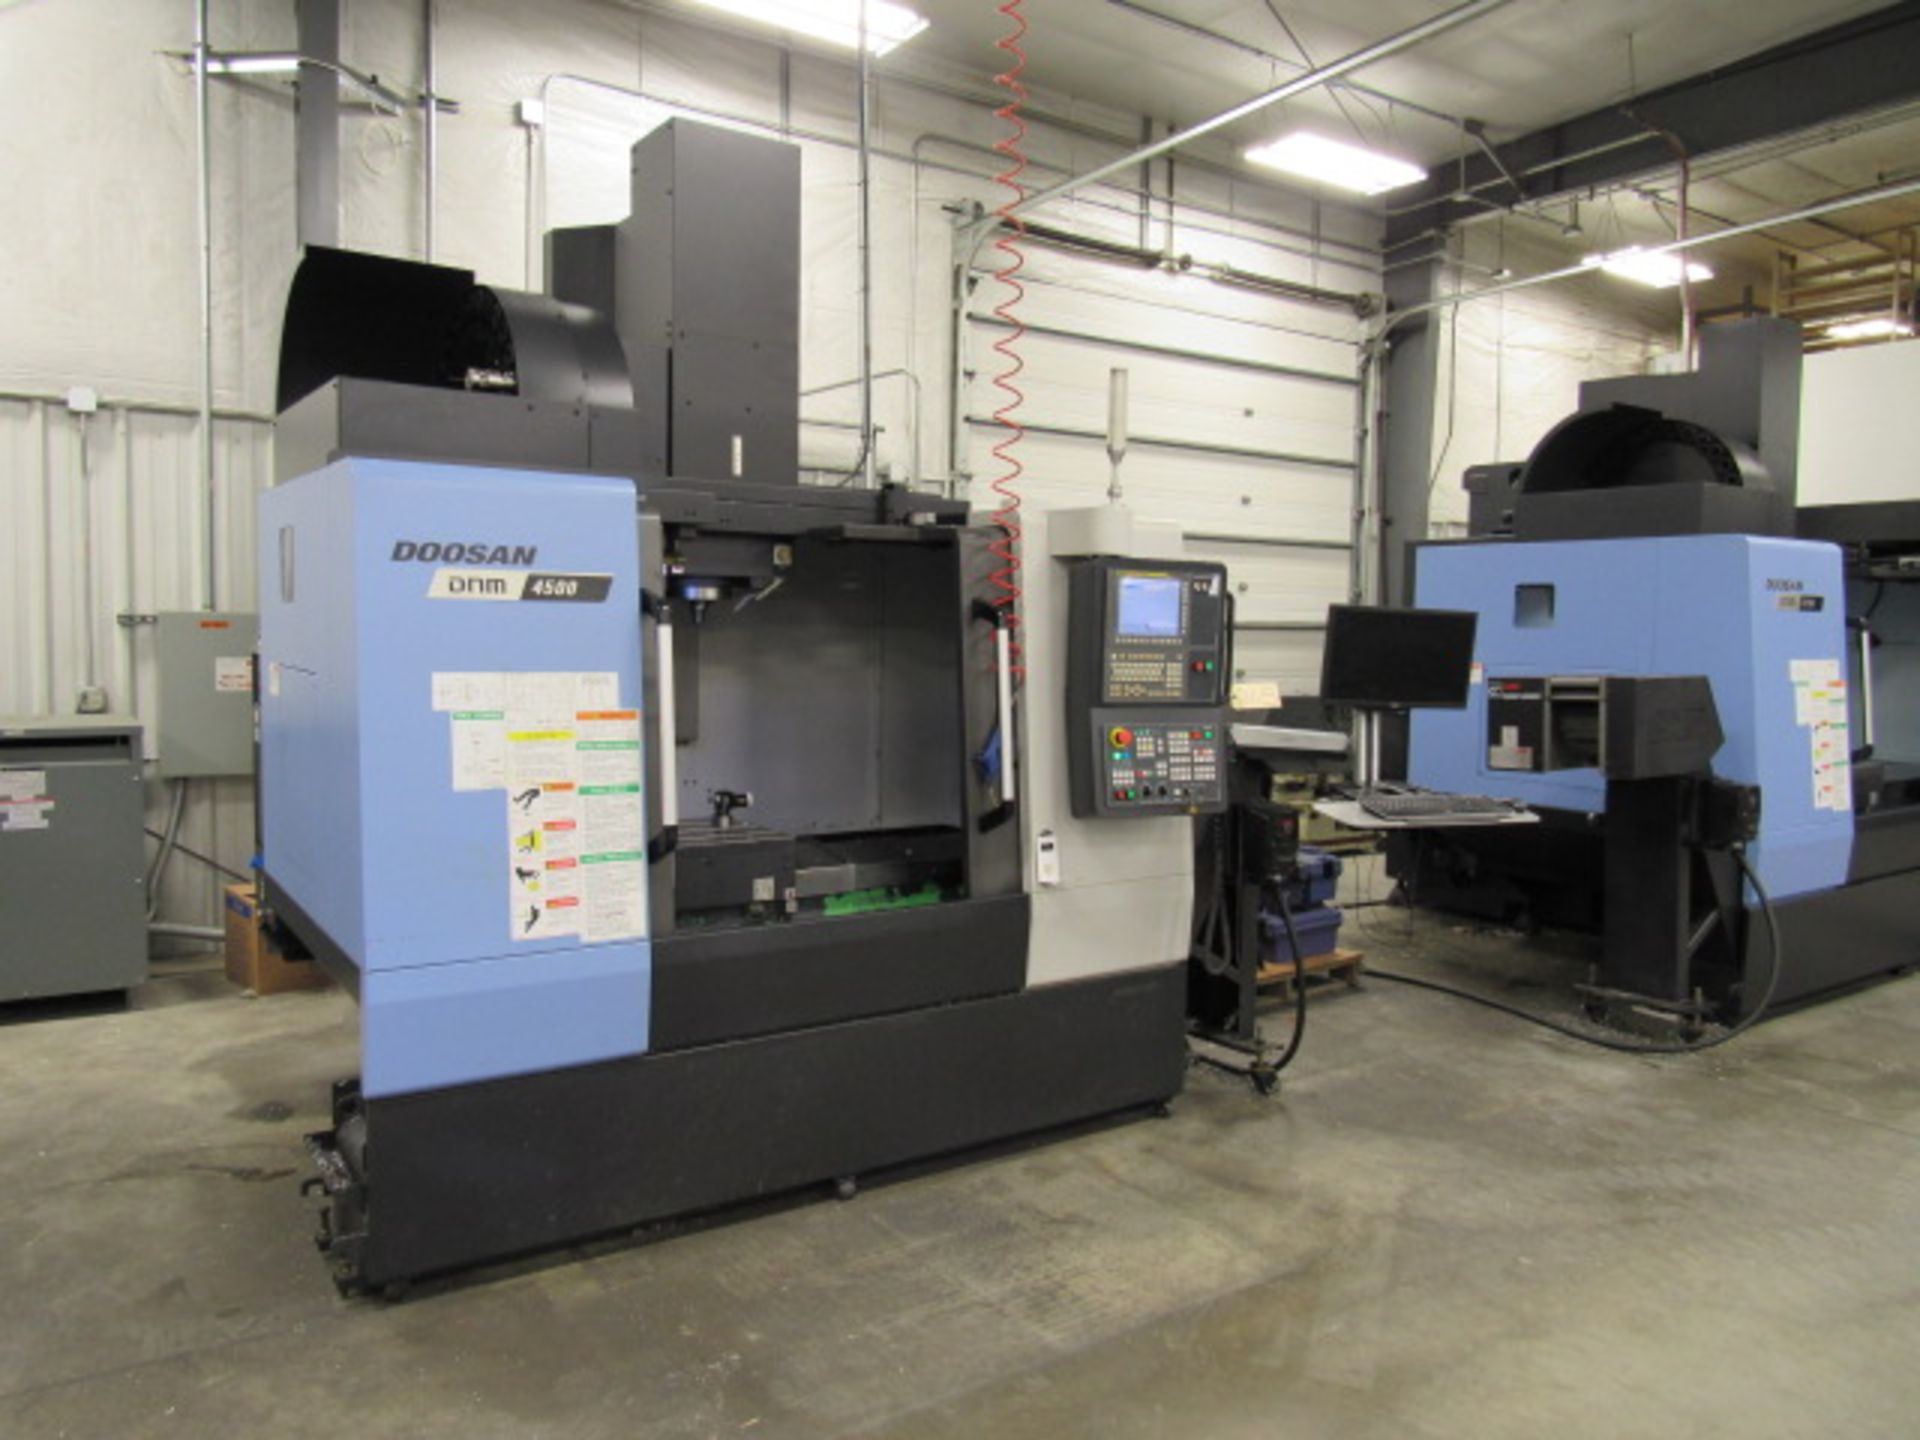 Doosan DNM 4500 CNC Vertical Machining Center with 39.4'' x 17.7'' Tables, Big Plus #40, Spindle - Image 5 of 9